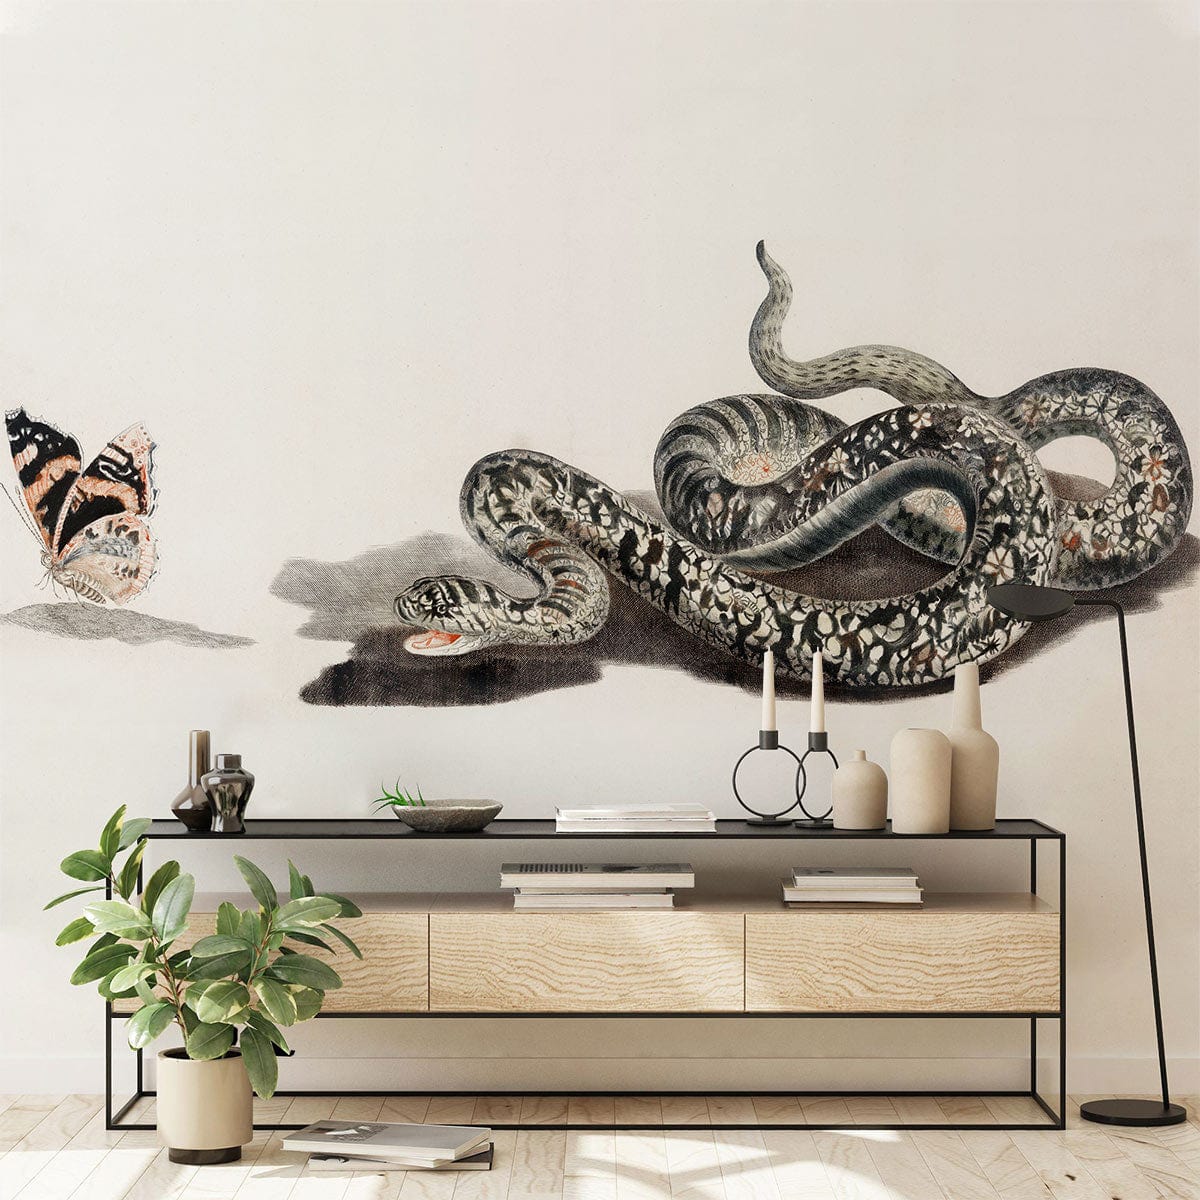 Snake & Butterfly Animal Mural Decoration